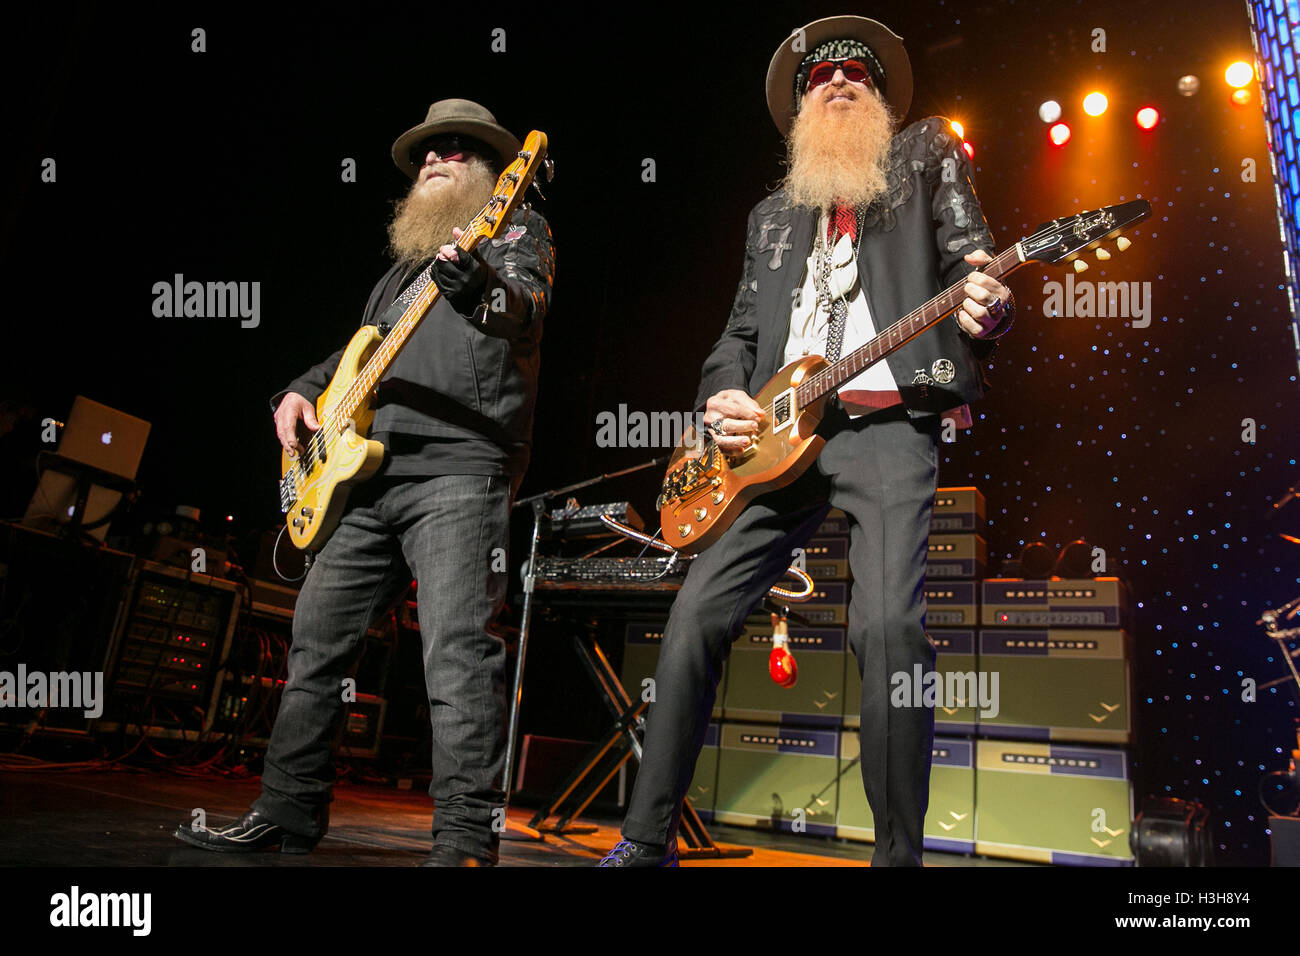 (L-R) Musicians Dusty Hill and Billy Gibbons of ZZ Top perfom at the Warfield Theater on October 2, 2016 in San Francisco, California. Stock Photo